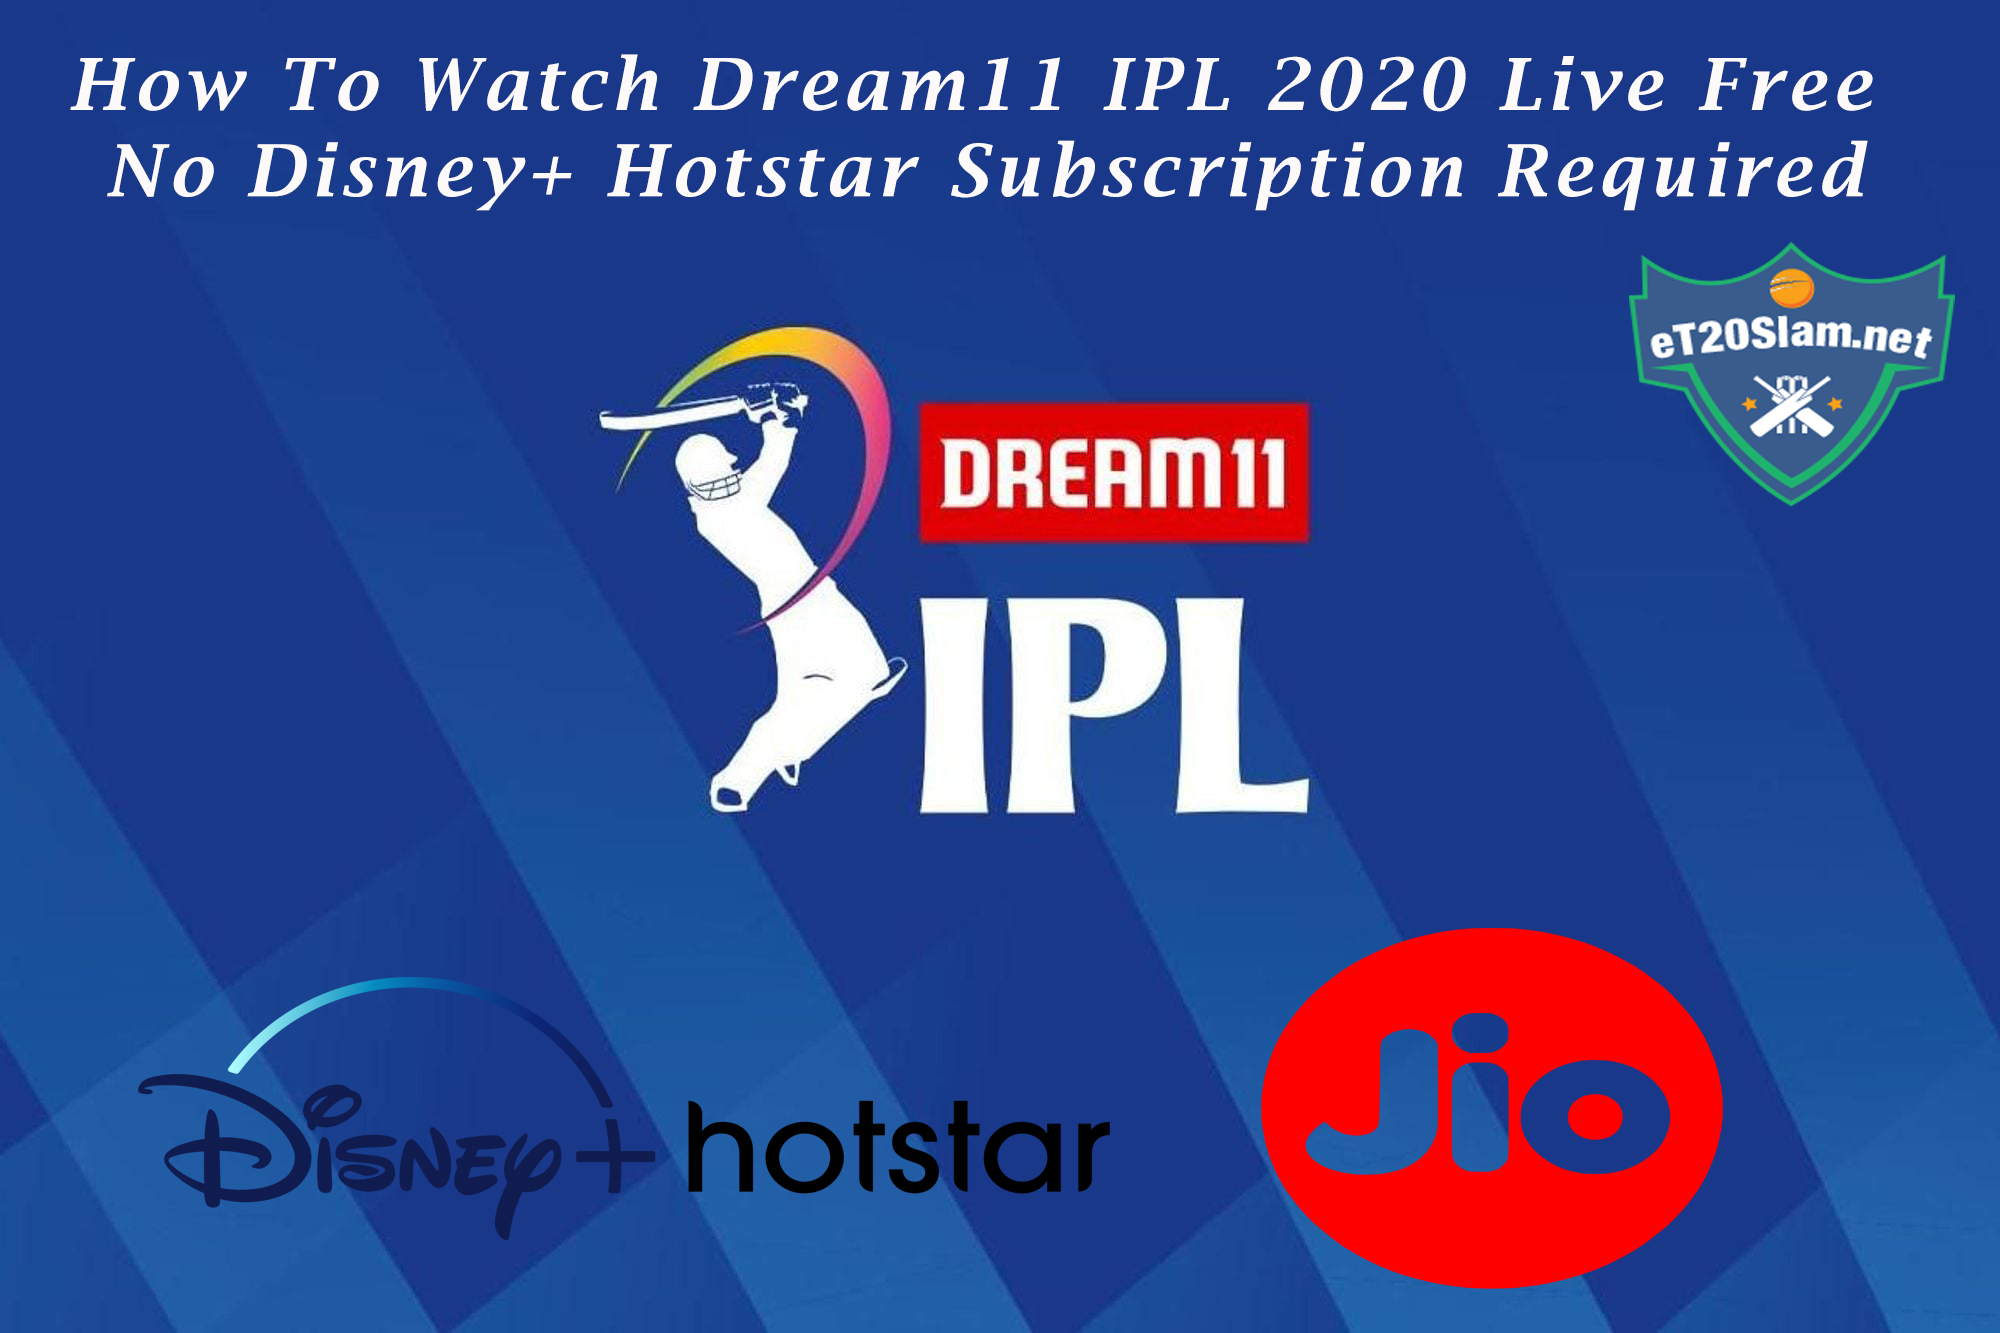 How To Watch Dream11 IPL 2020 Live Free 